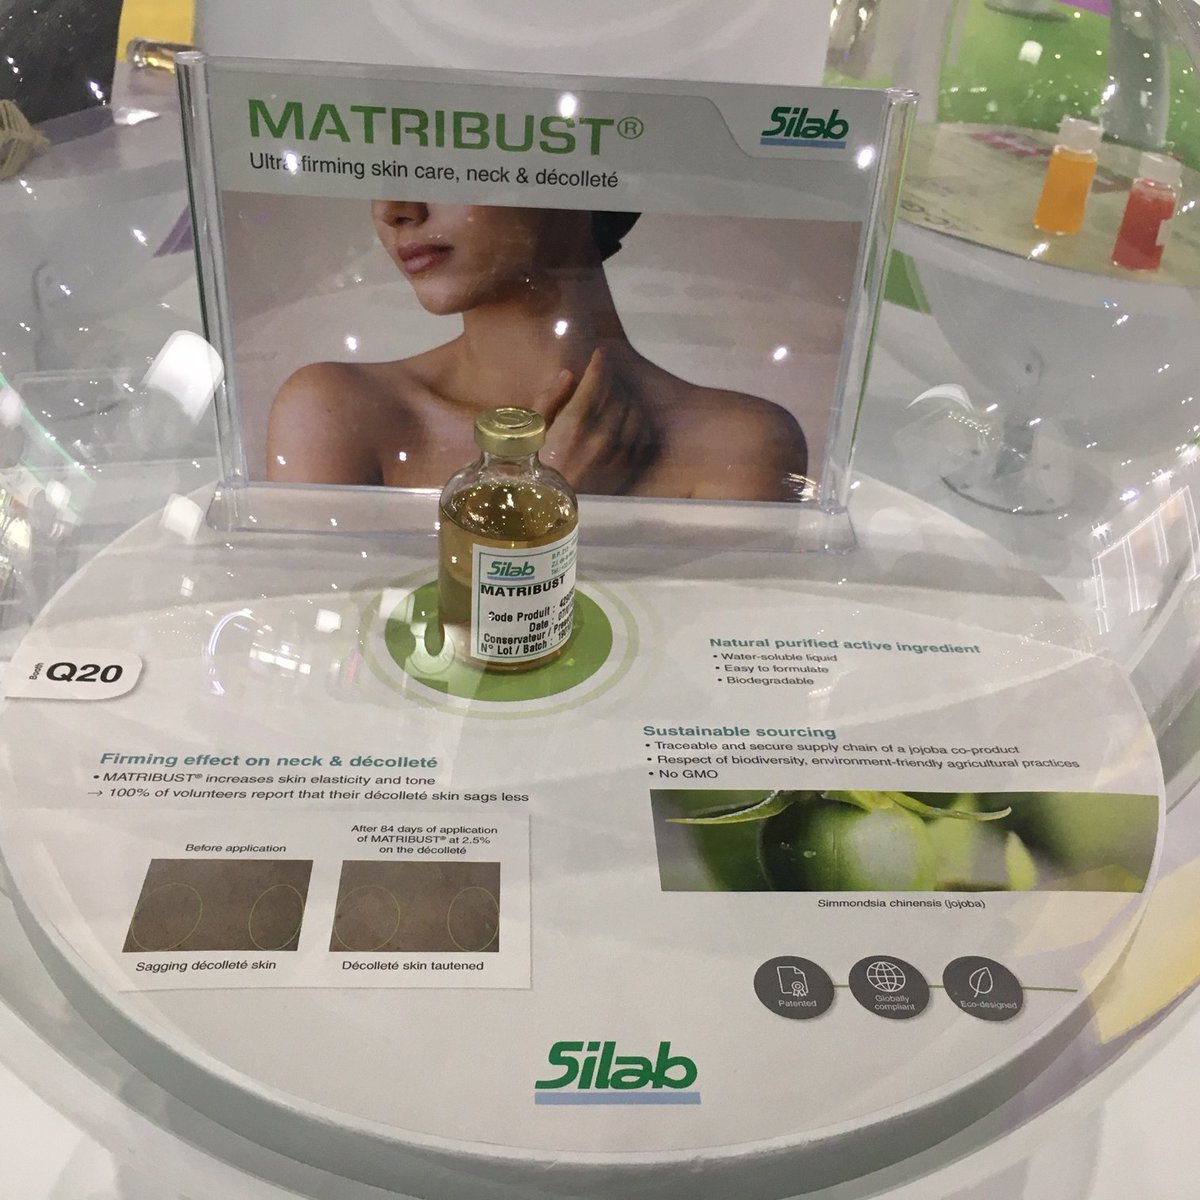 Visit the innovation zone displaying #MATRIBUST at #incosAsia! @incosmetics #activeingredients #innovation